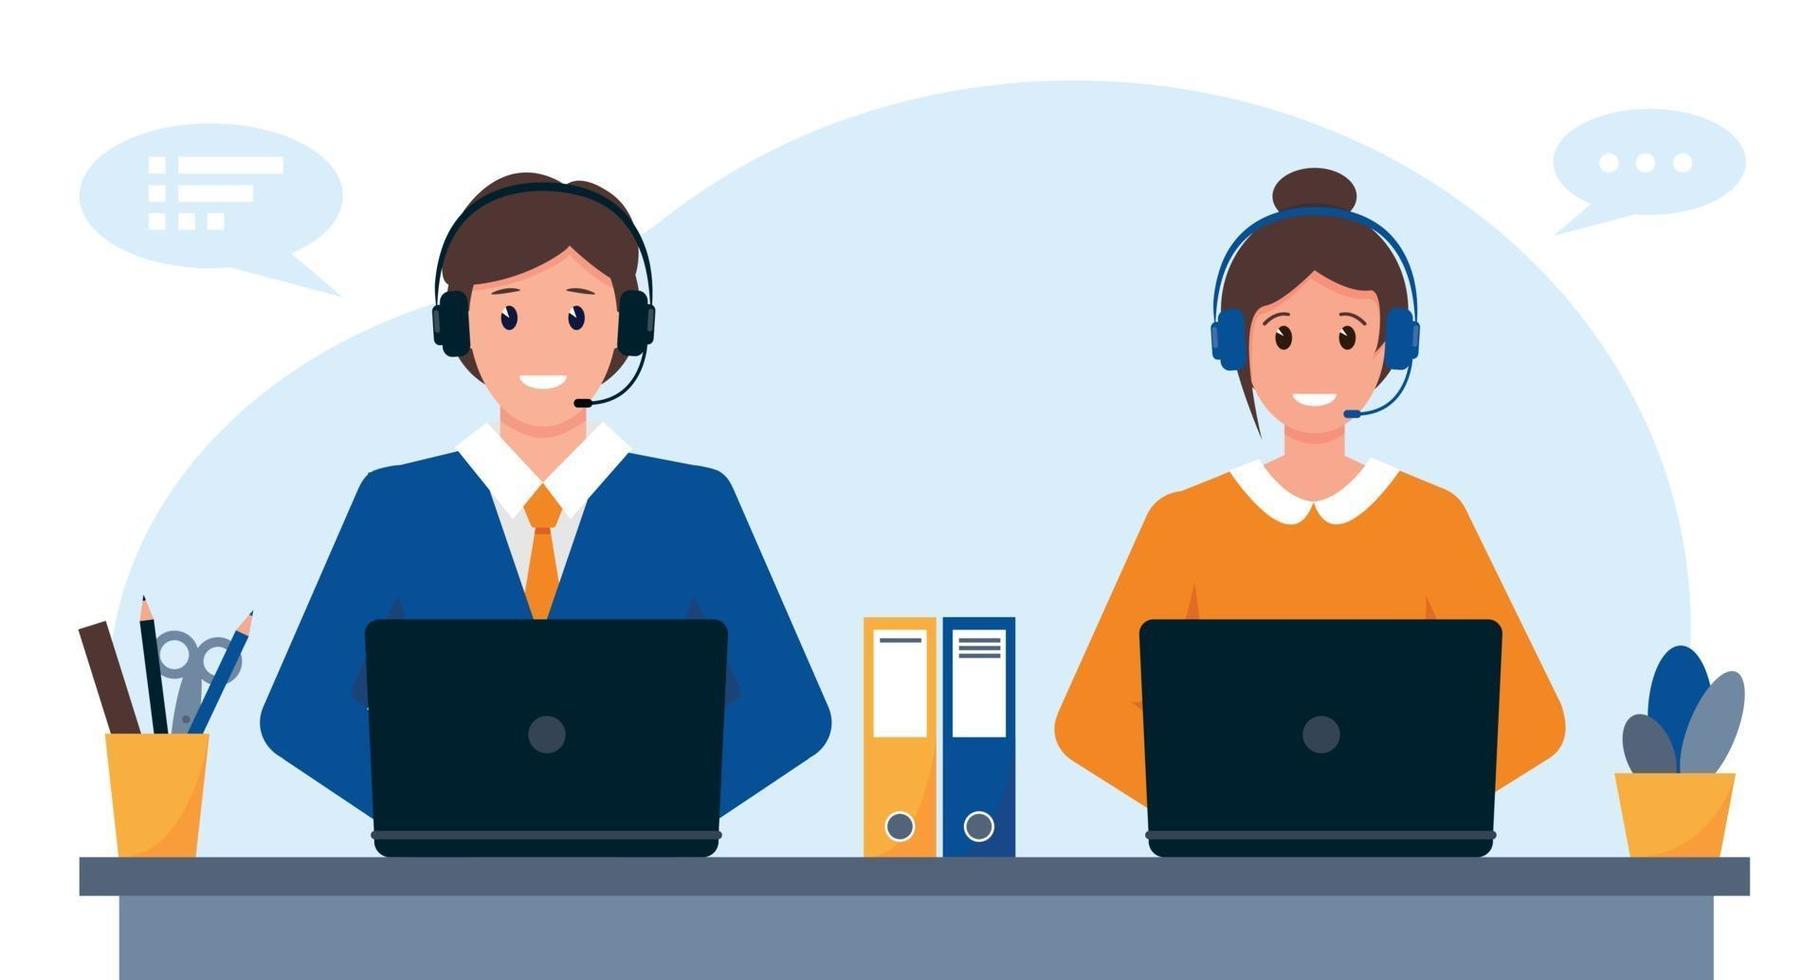 Young man and woman with headphones, microphone and computer. Customer service, support or call center concept. vector